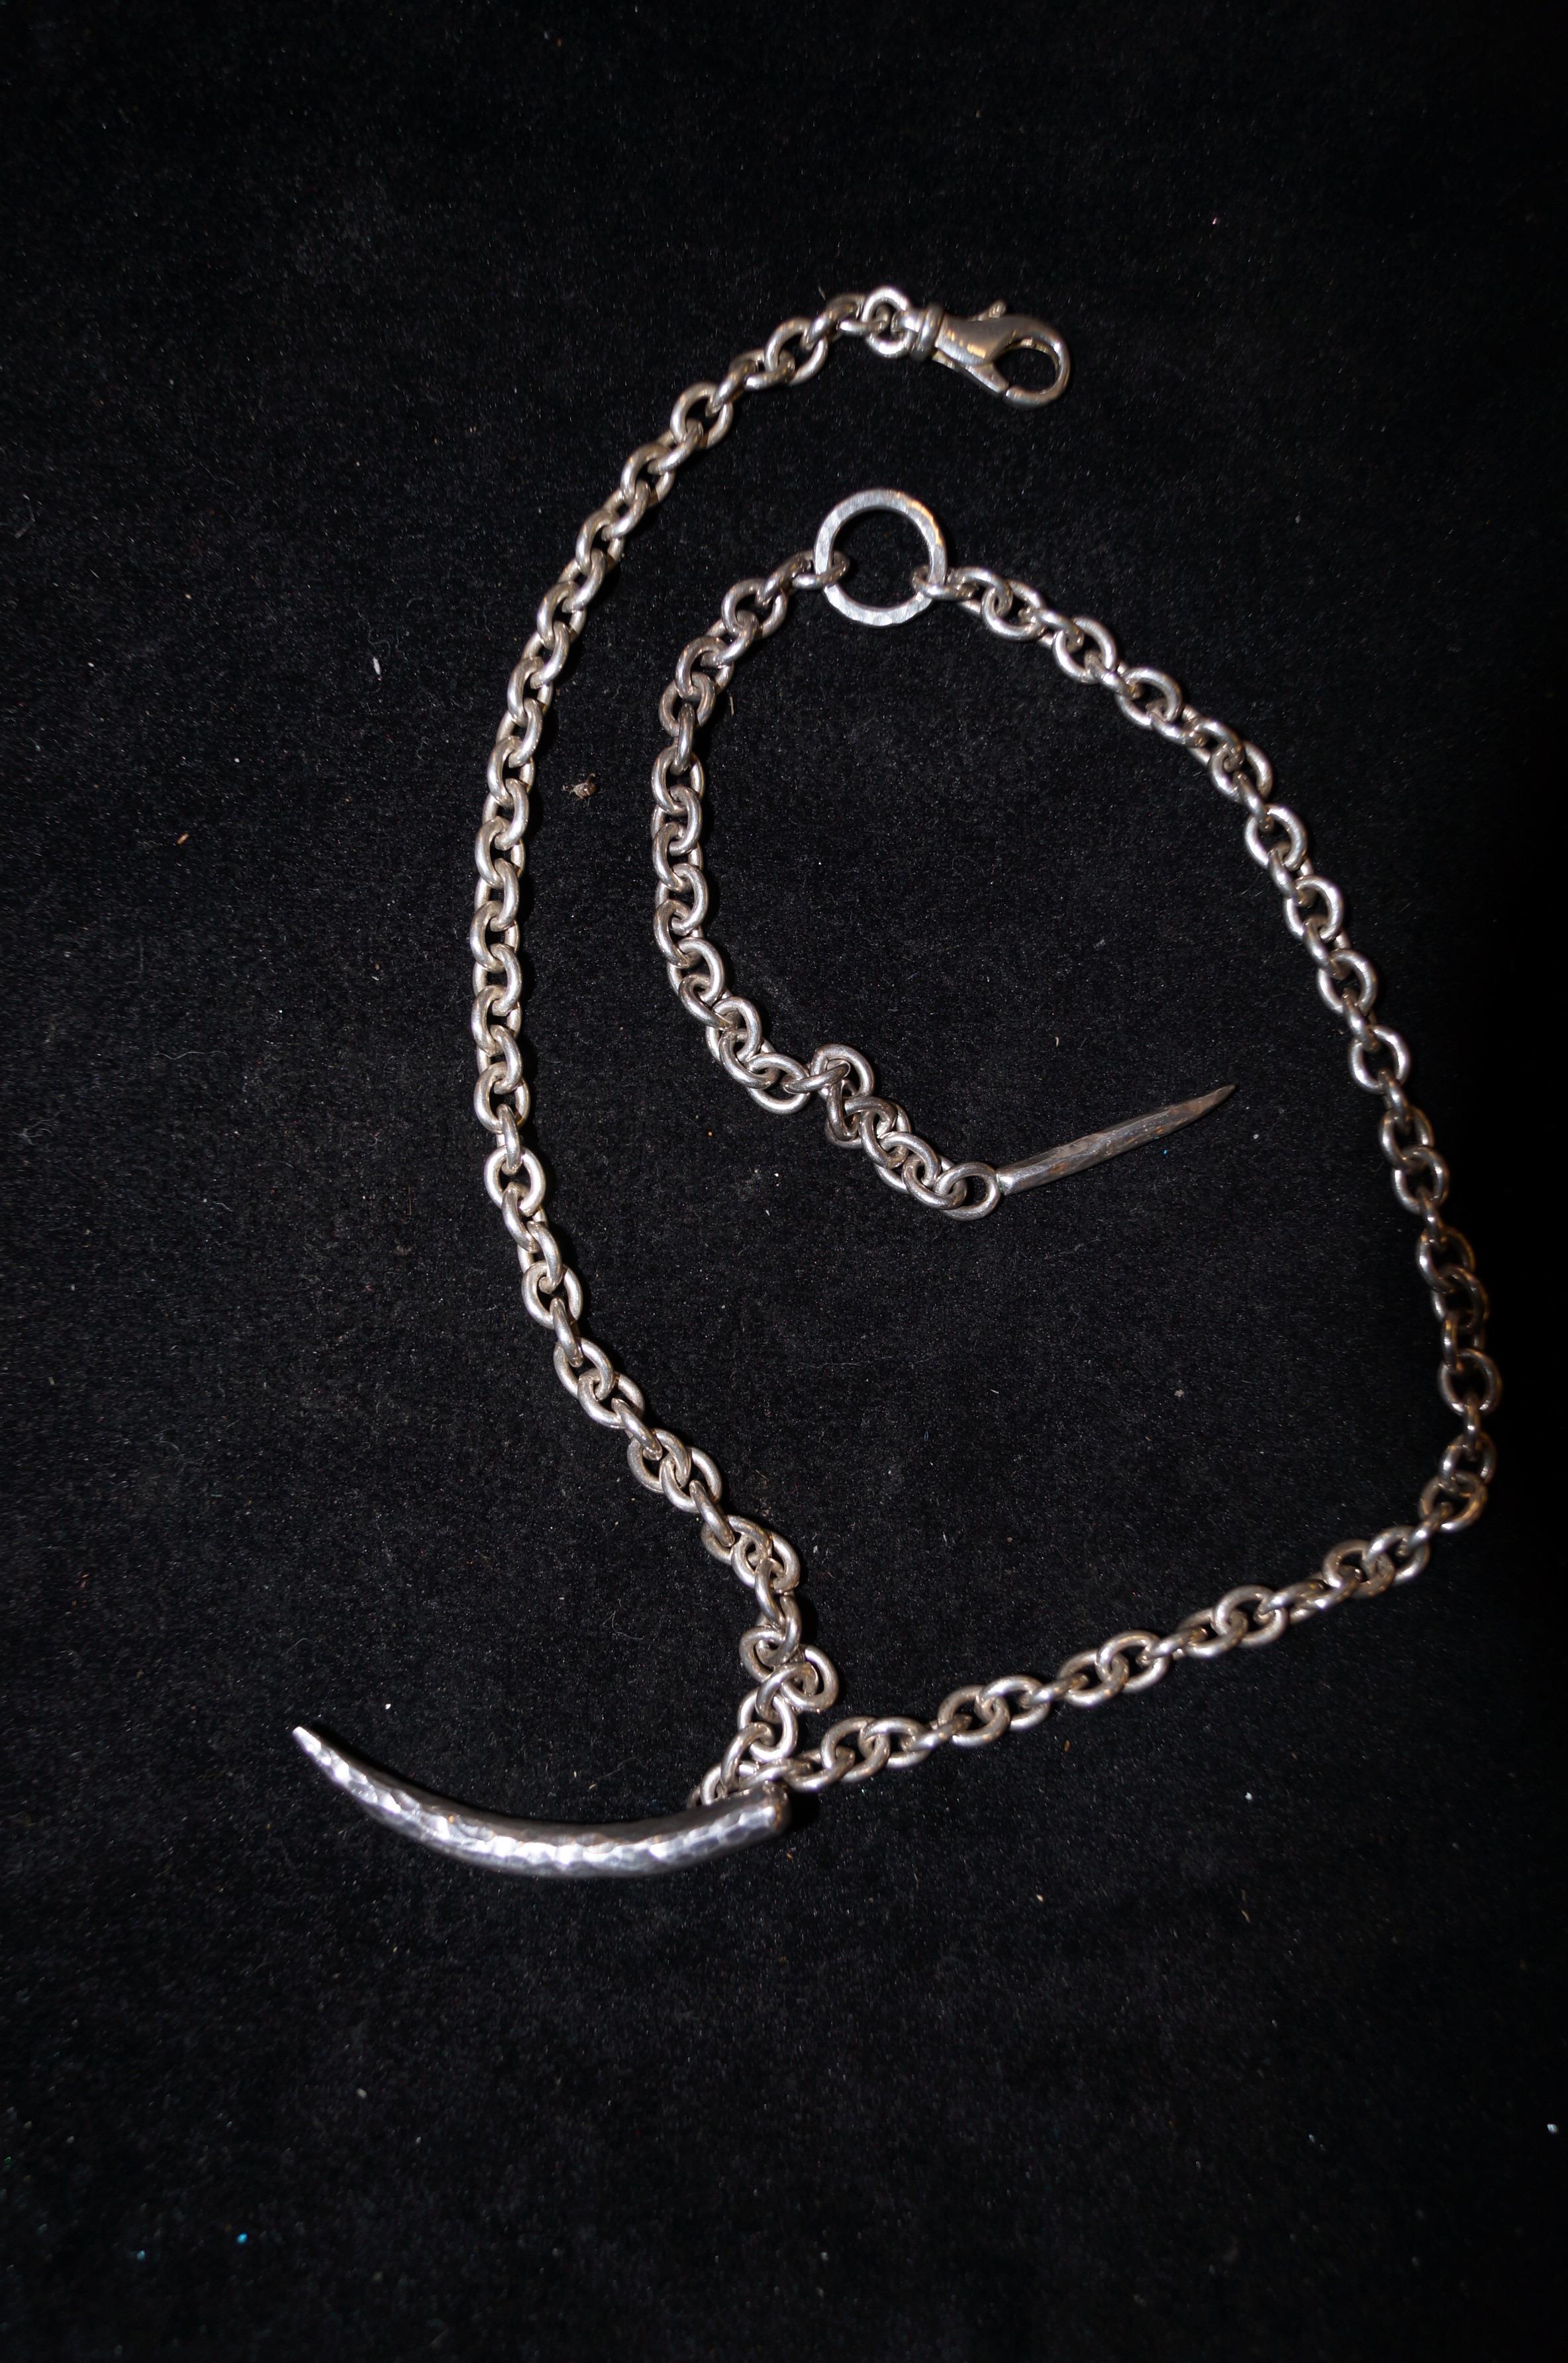 Fully hallmarked silver belchure chain with 2 pend